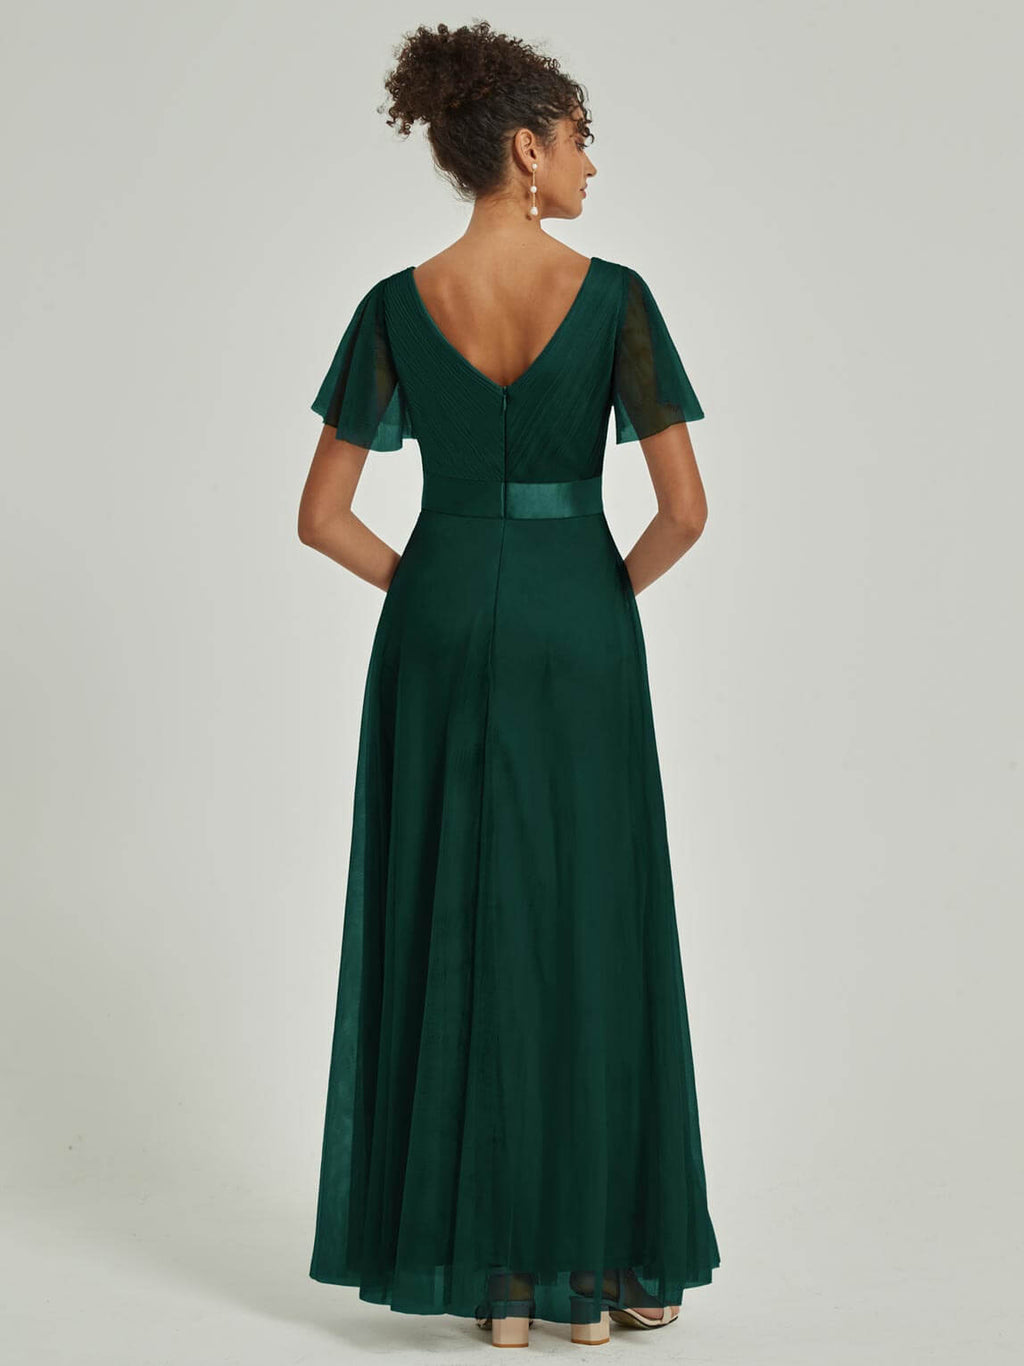 NZ Bridal Tulle Emerald Green Pleated bridesmaid dresses 07962ep Lucy a